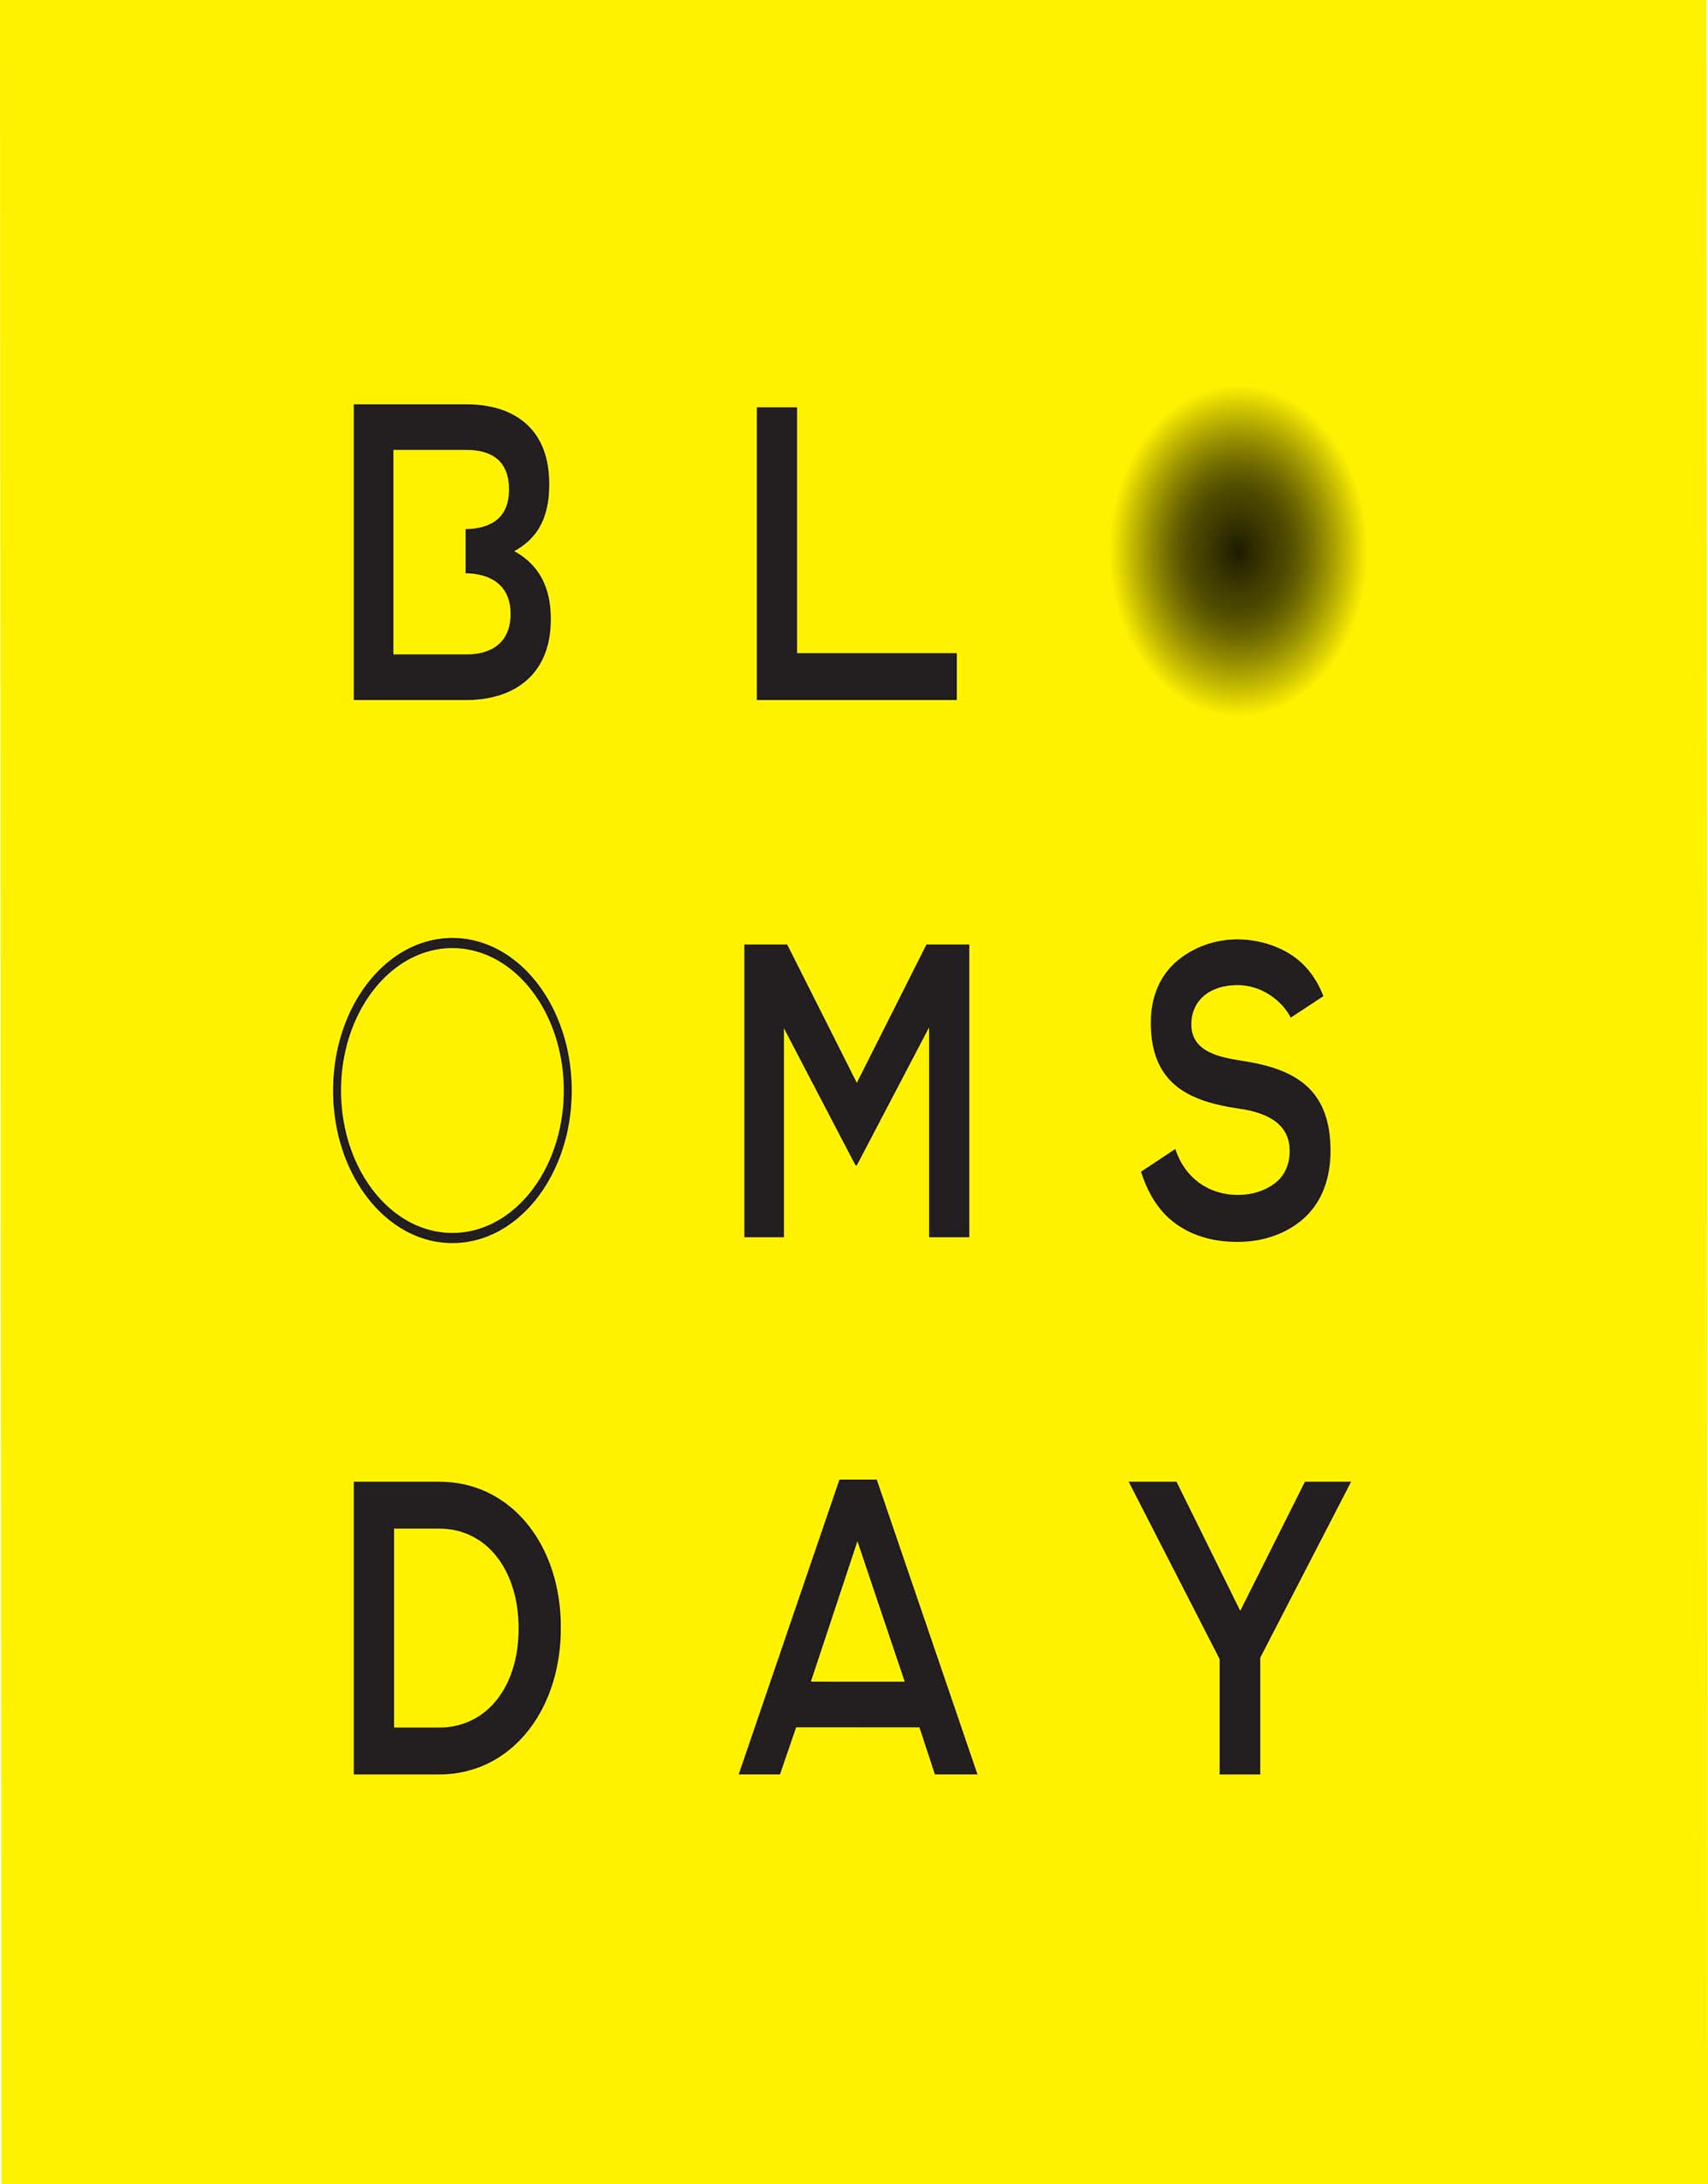 Bloomsday animation